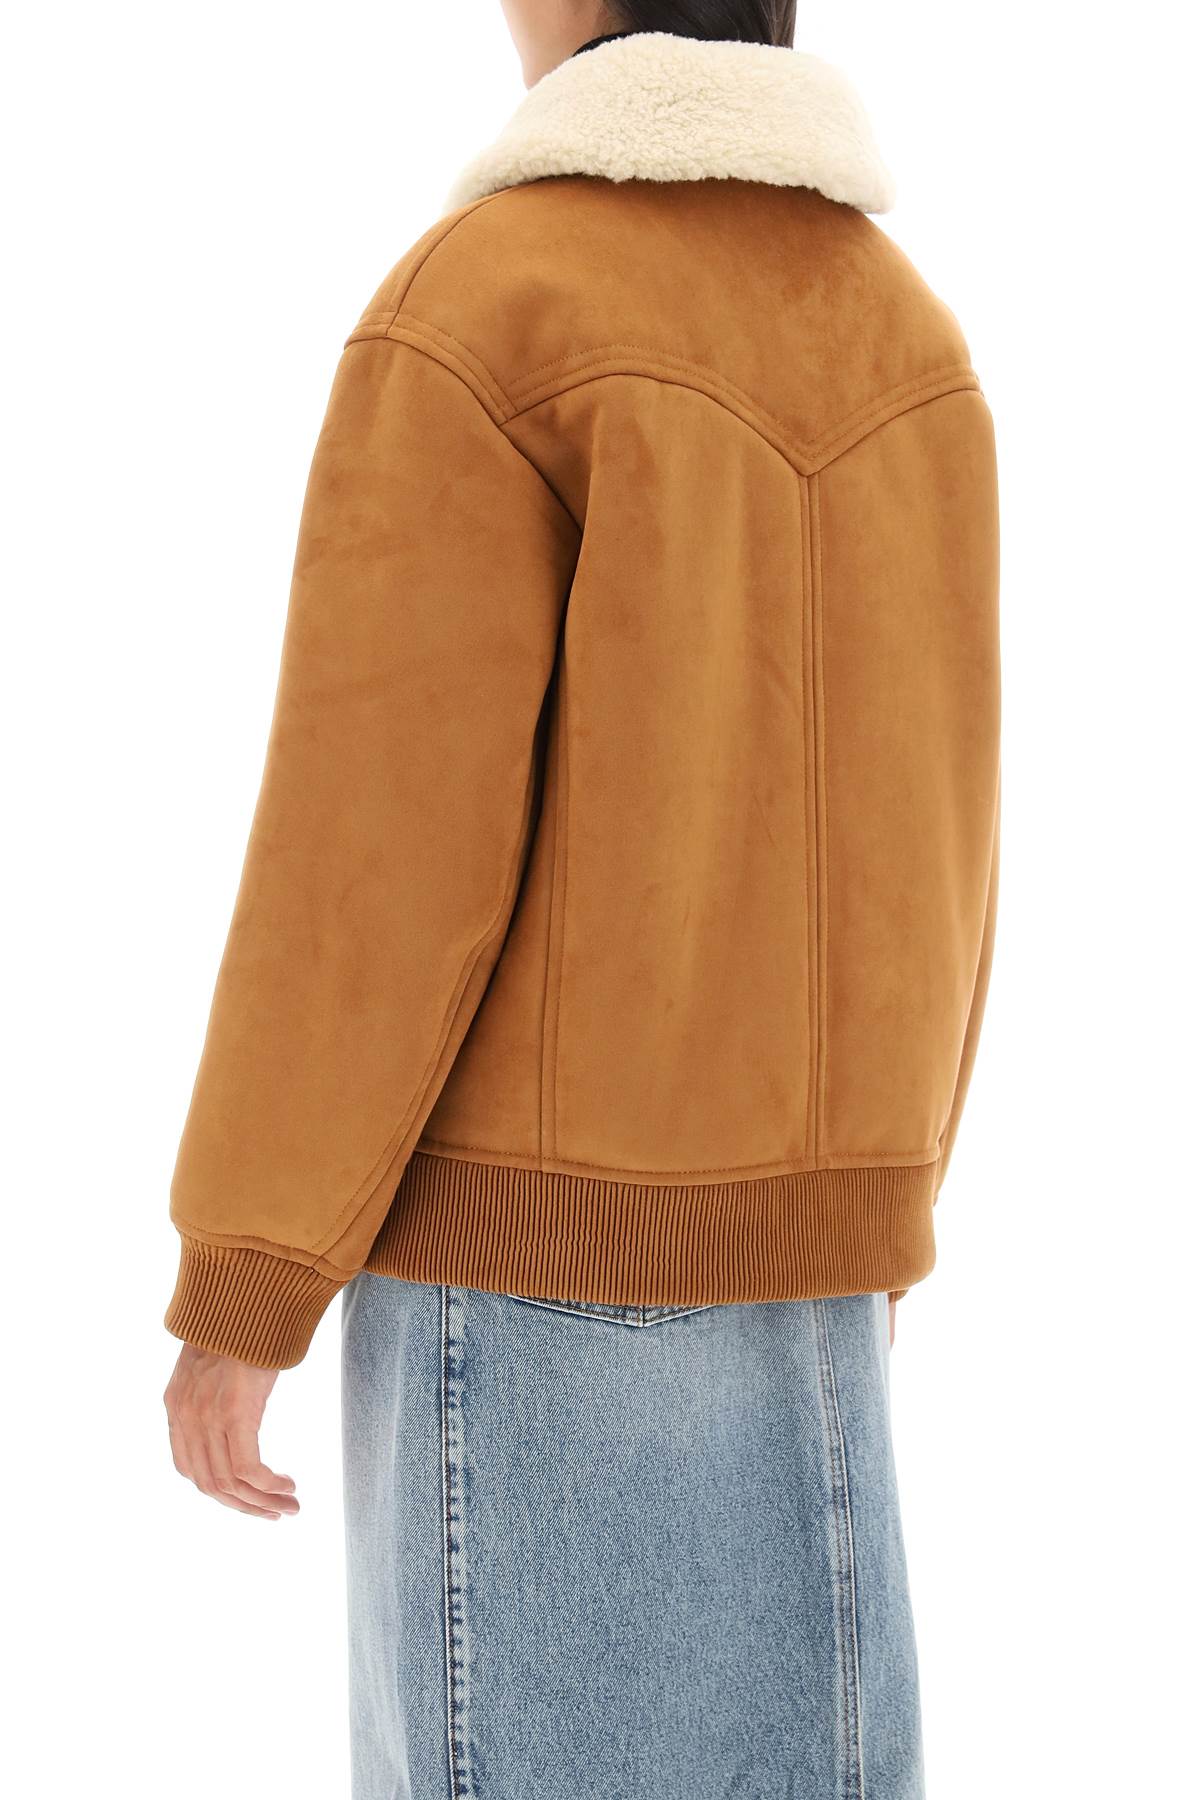 Stand studio lillee eco-shearling bomber jacket-2